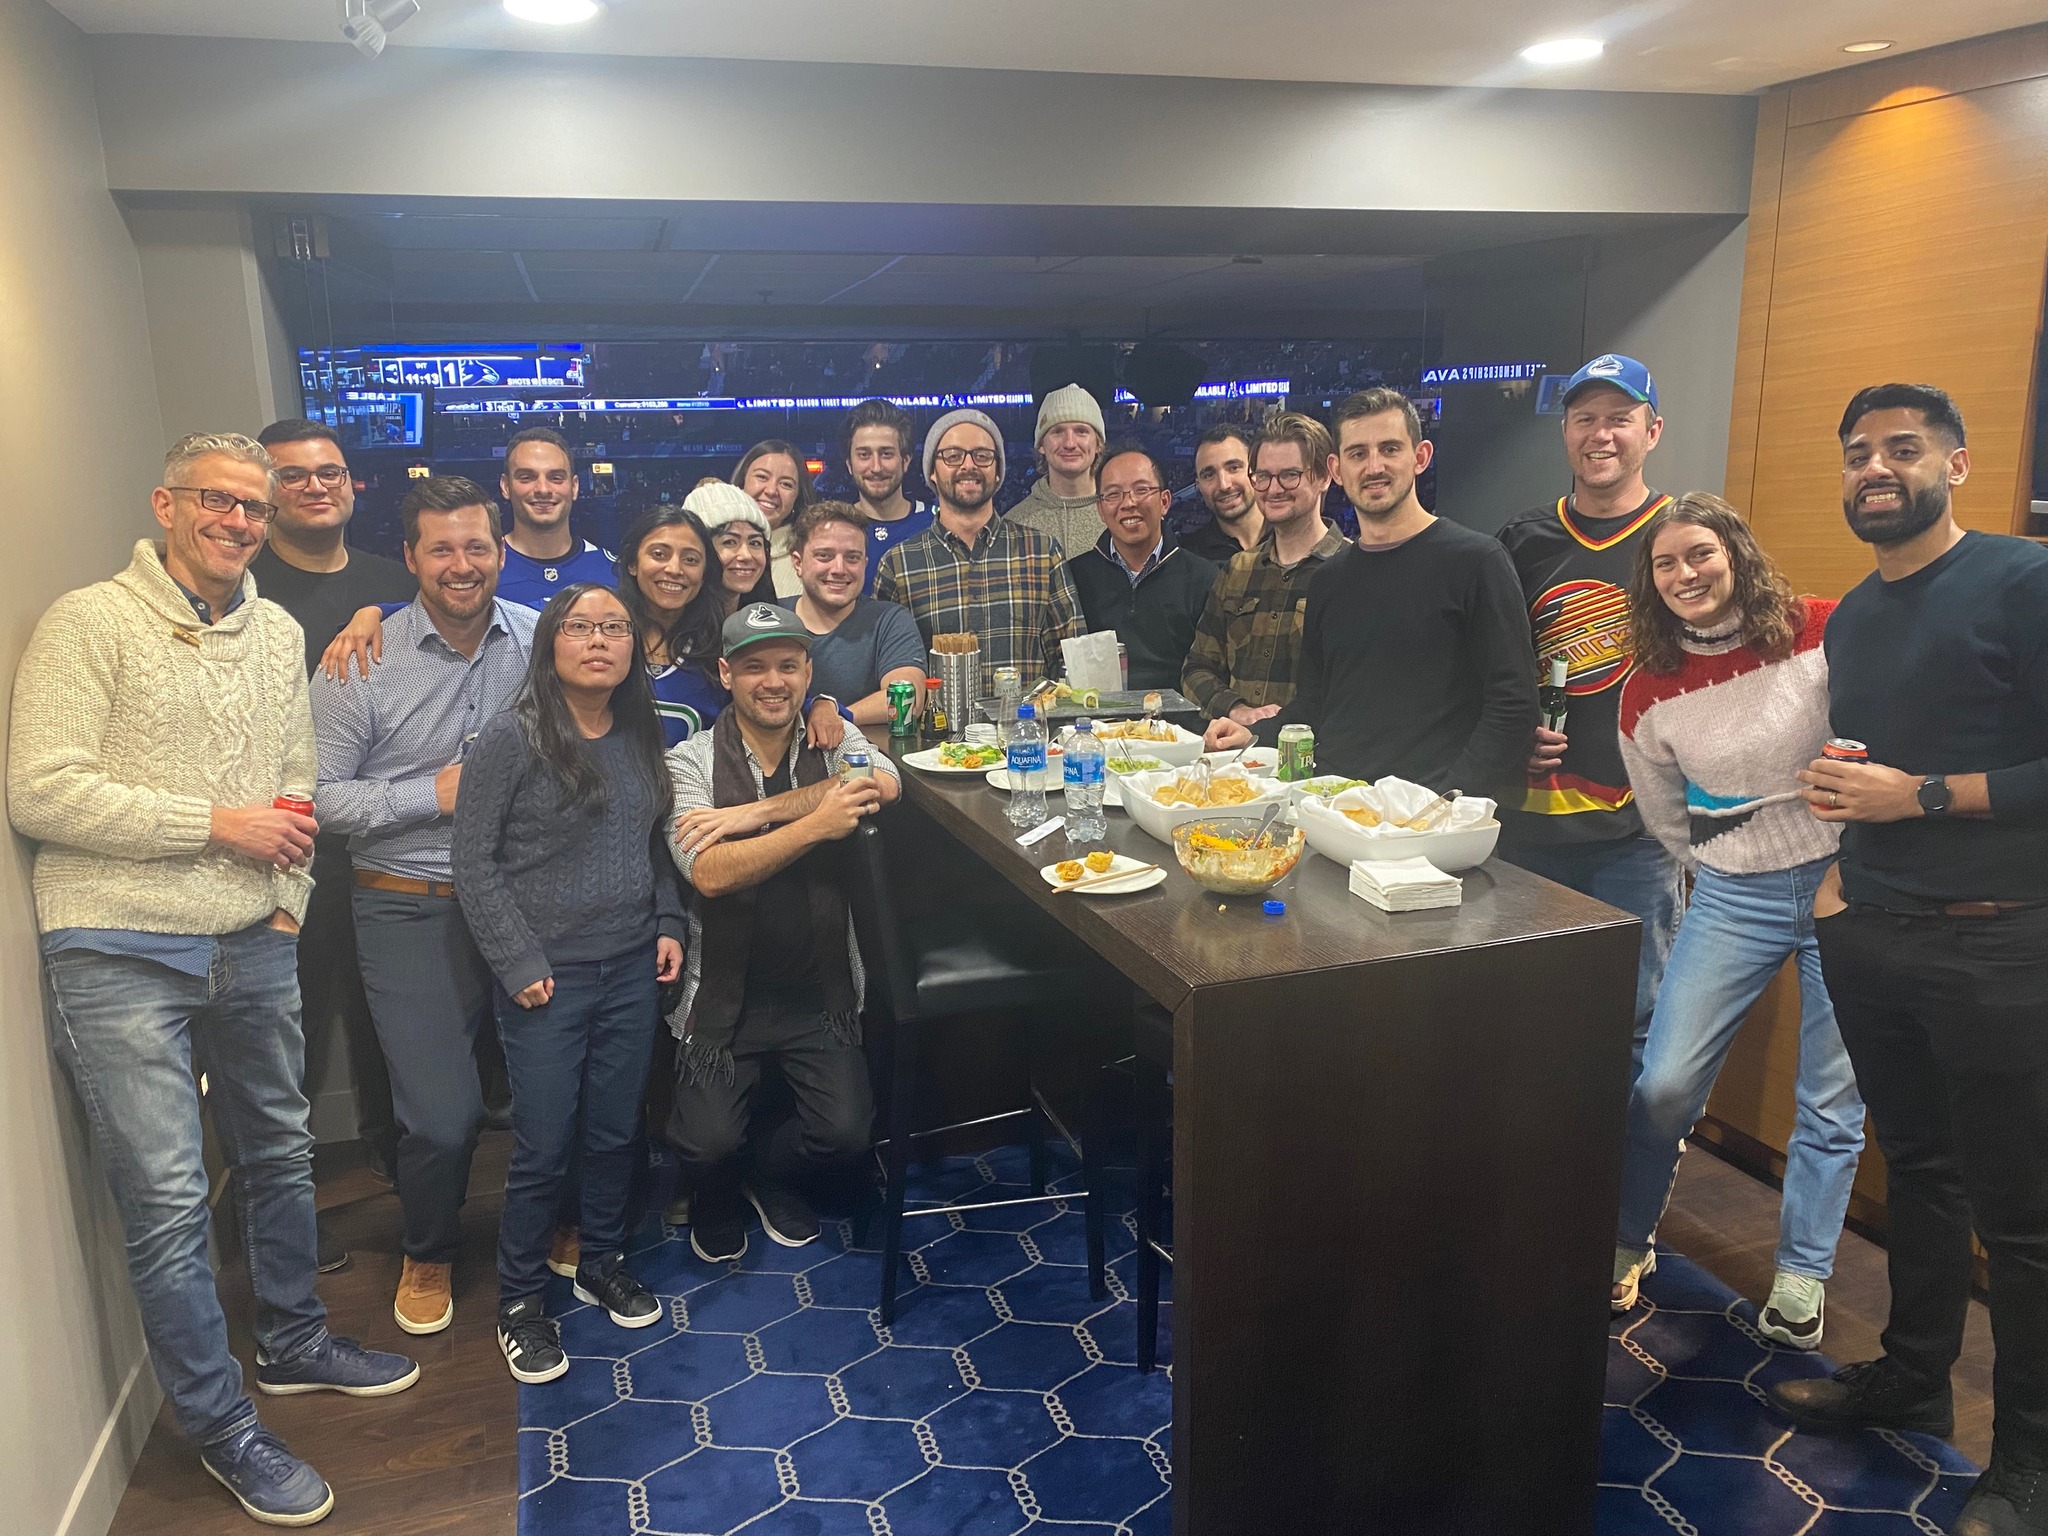 This week our team out in Vancouver got together to watch the Vancouver Canucks vs Washington Capitals hockey game! It was great for everyone to connect as a team, have some drinks, and watch some good hockey. Go Canucks! #LifeatBrock